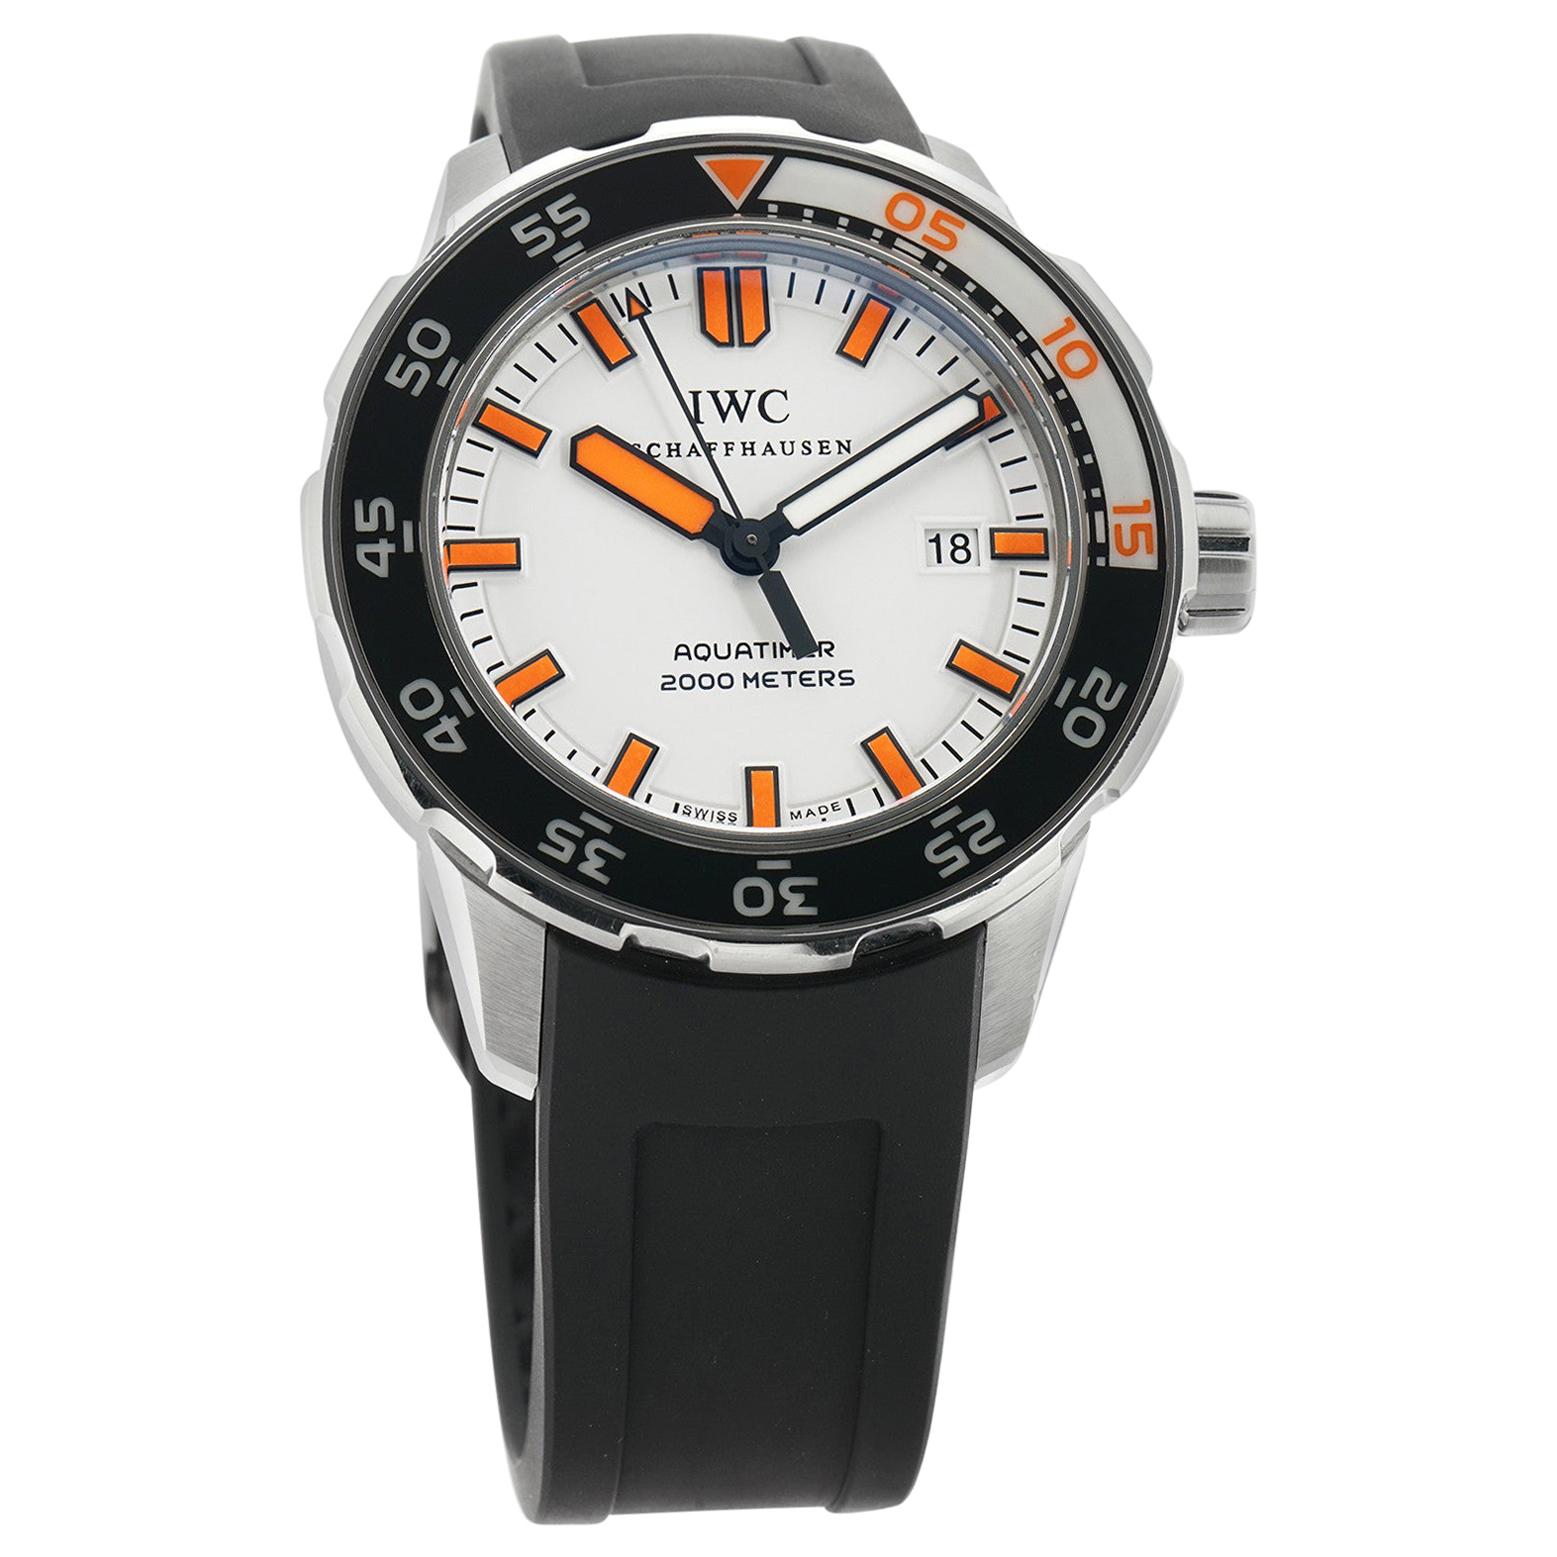 IWC Aquatimer IW3568-07, White Dial, Certified and Warranty